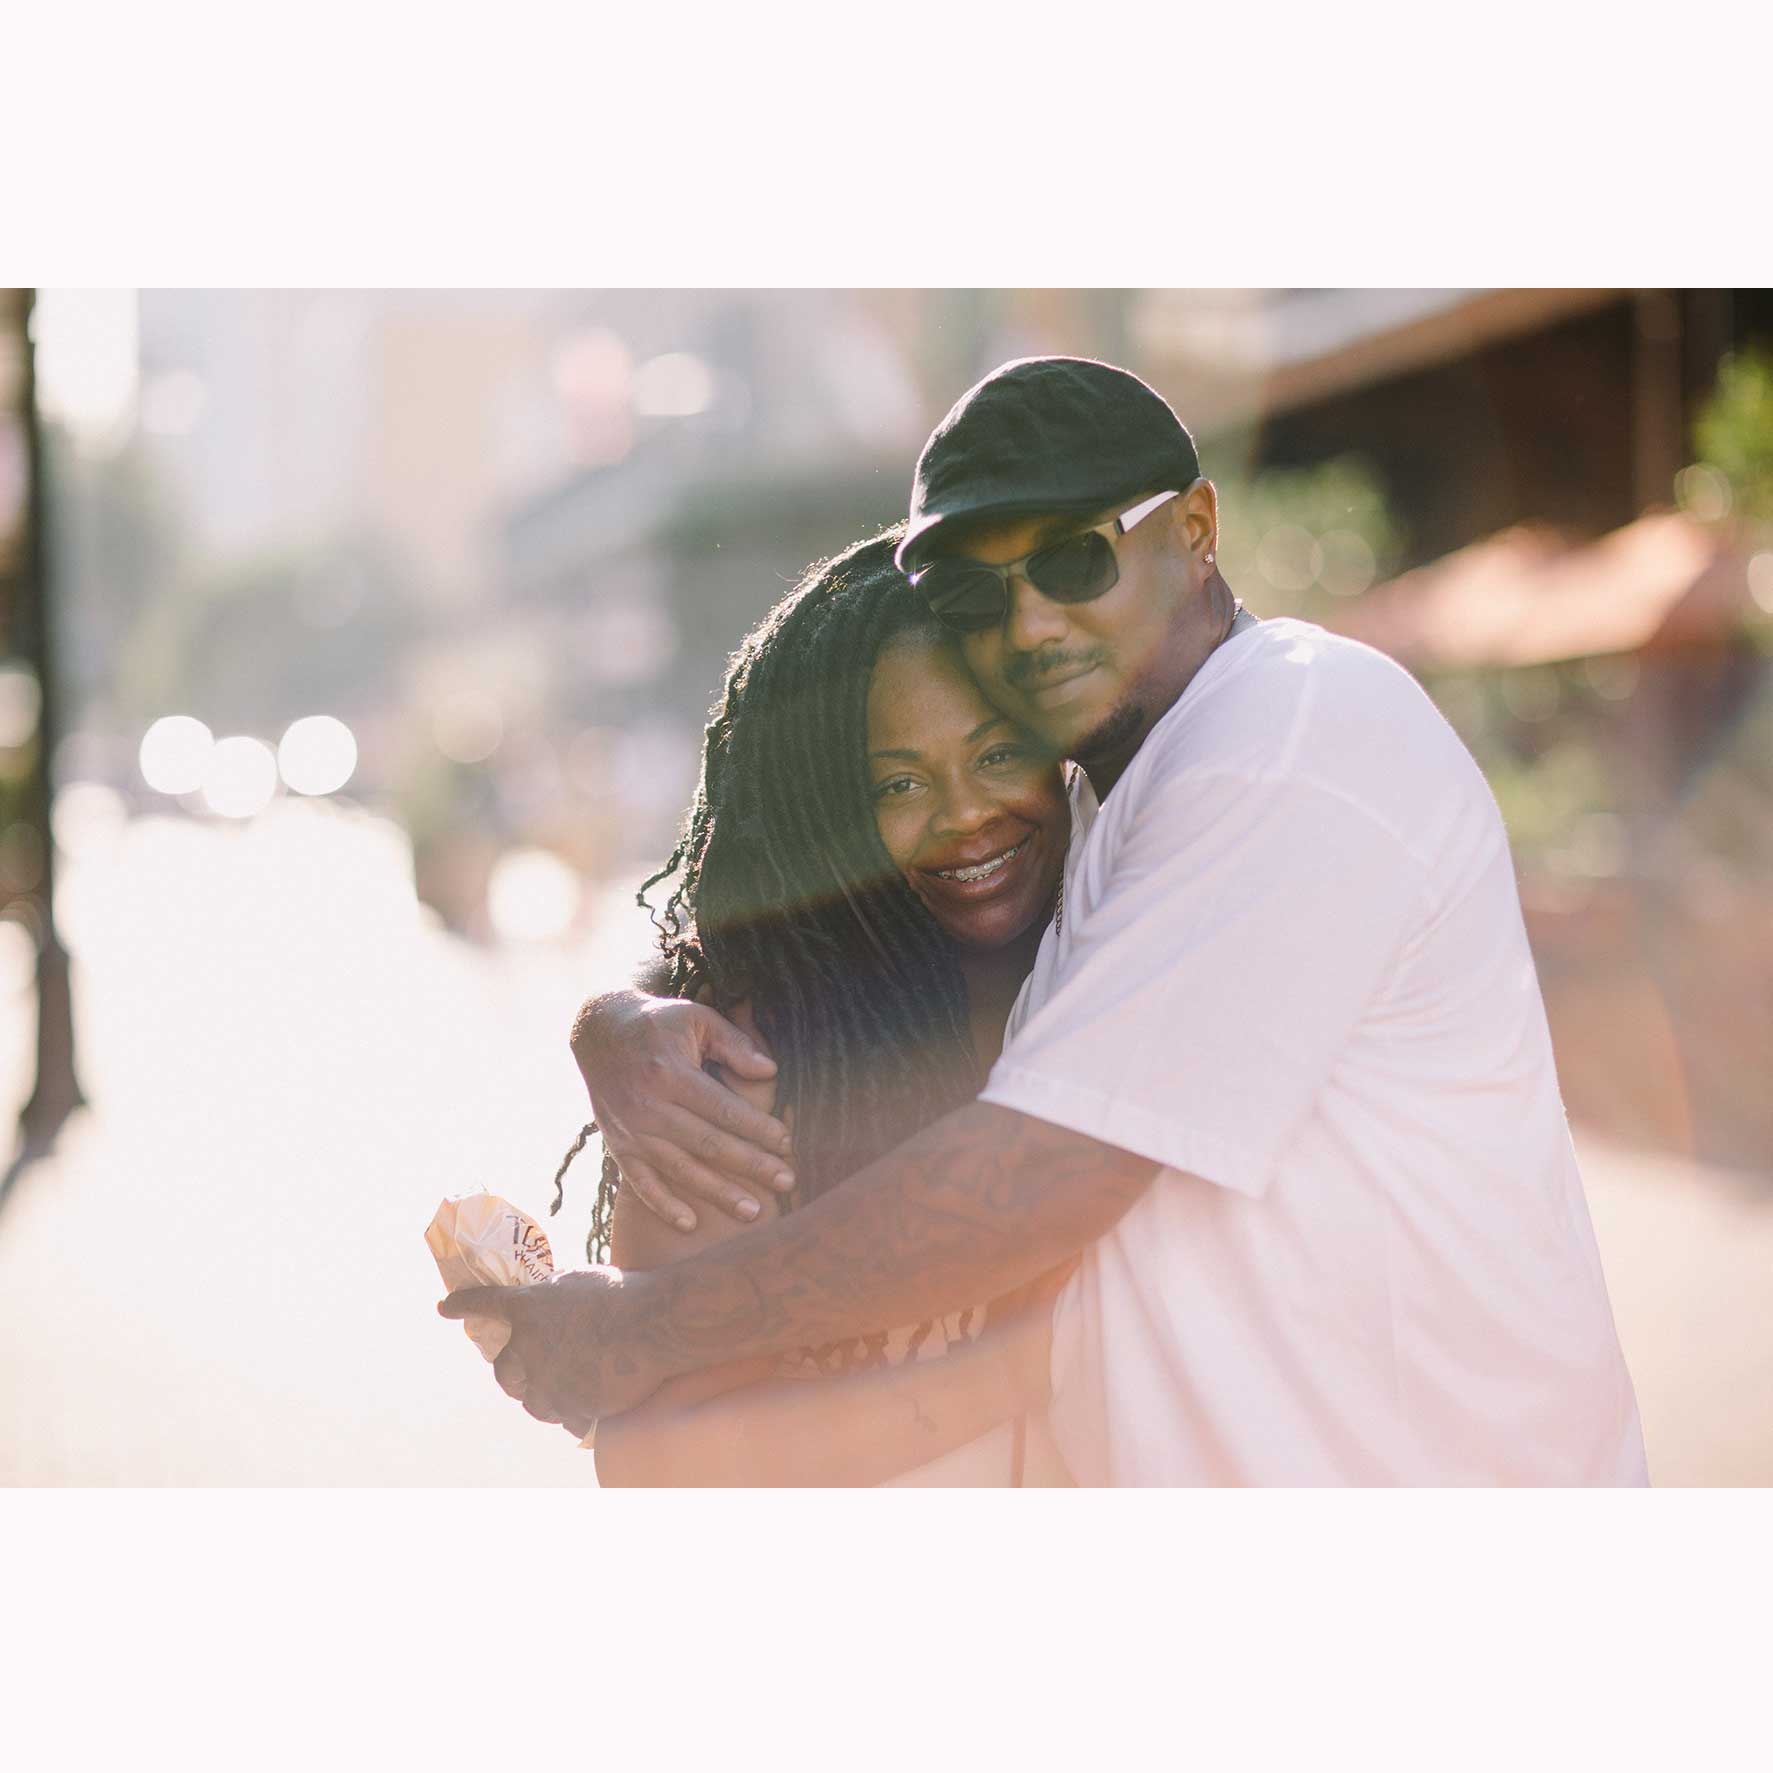 9 incredibly Adorable Couples We Spotted Strolling Through New Orleans
